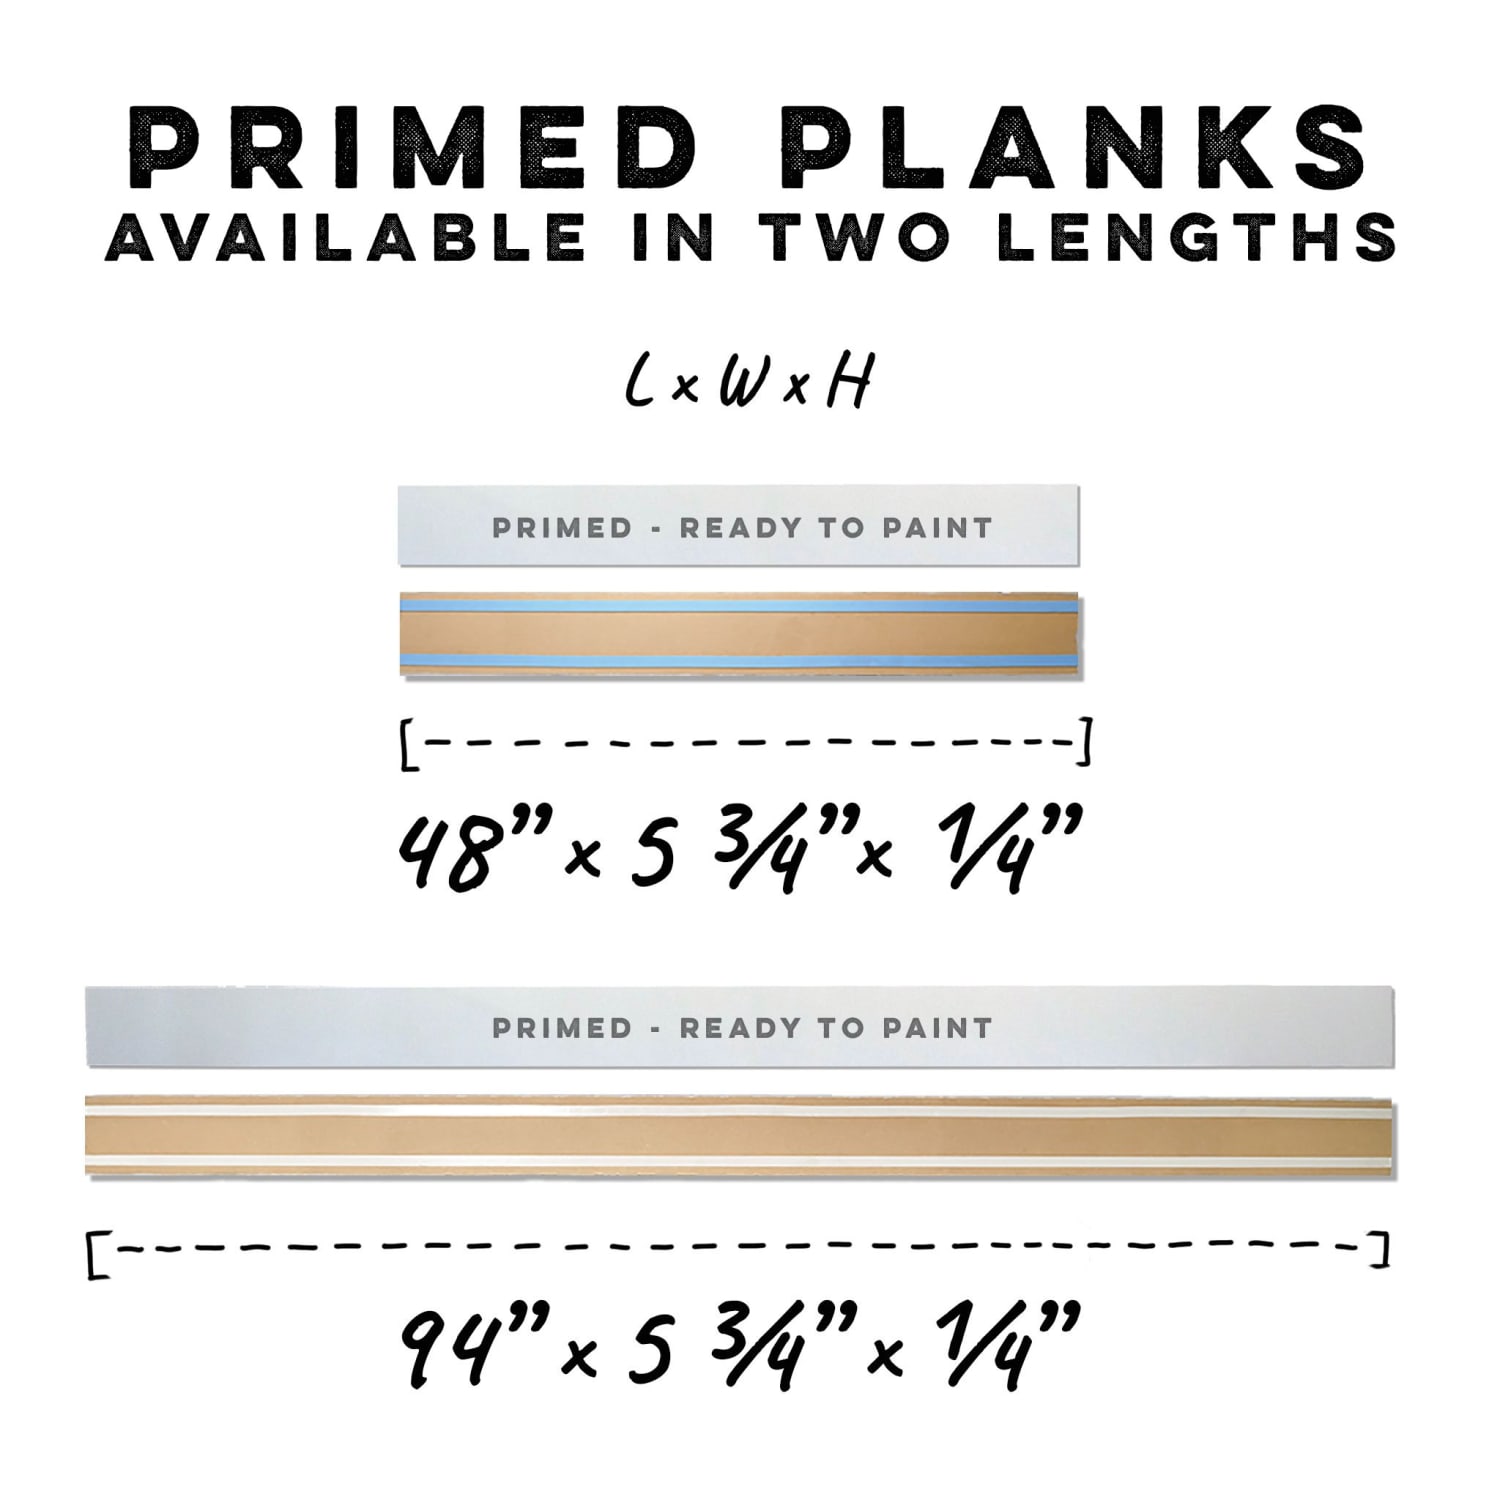 Classic Shiplap - Primed (ready to paint)